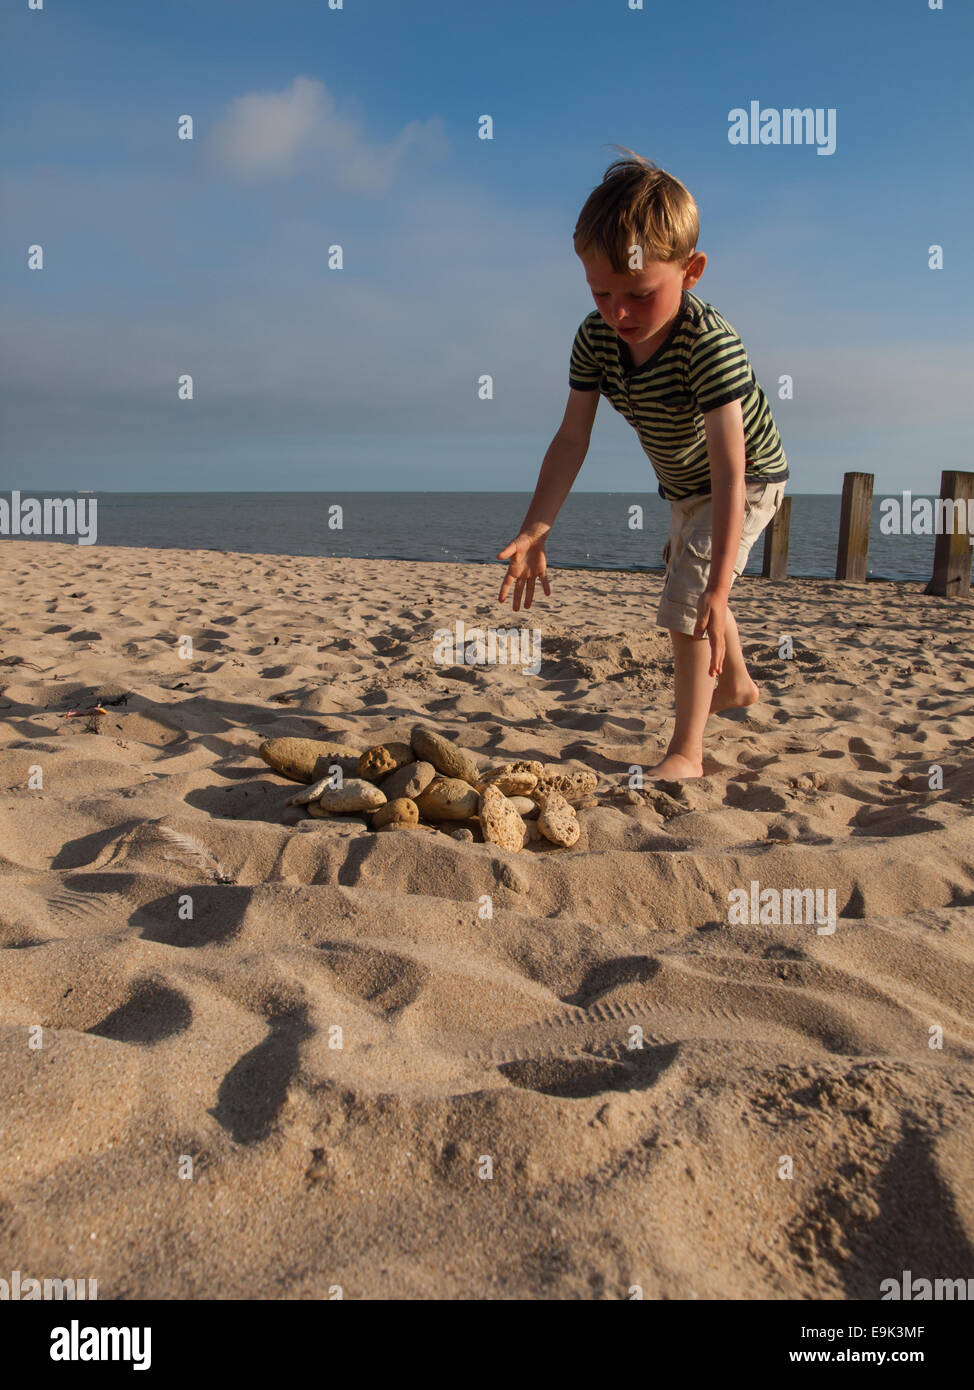 small boy collecting stones on a sandy beach Stock Photo